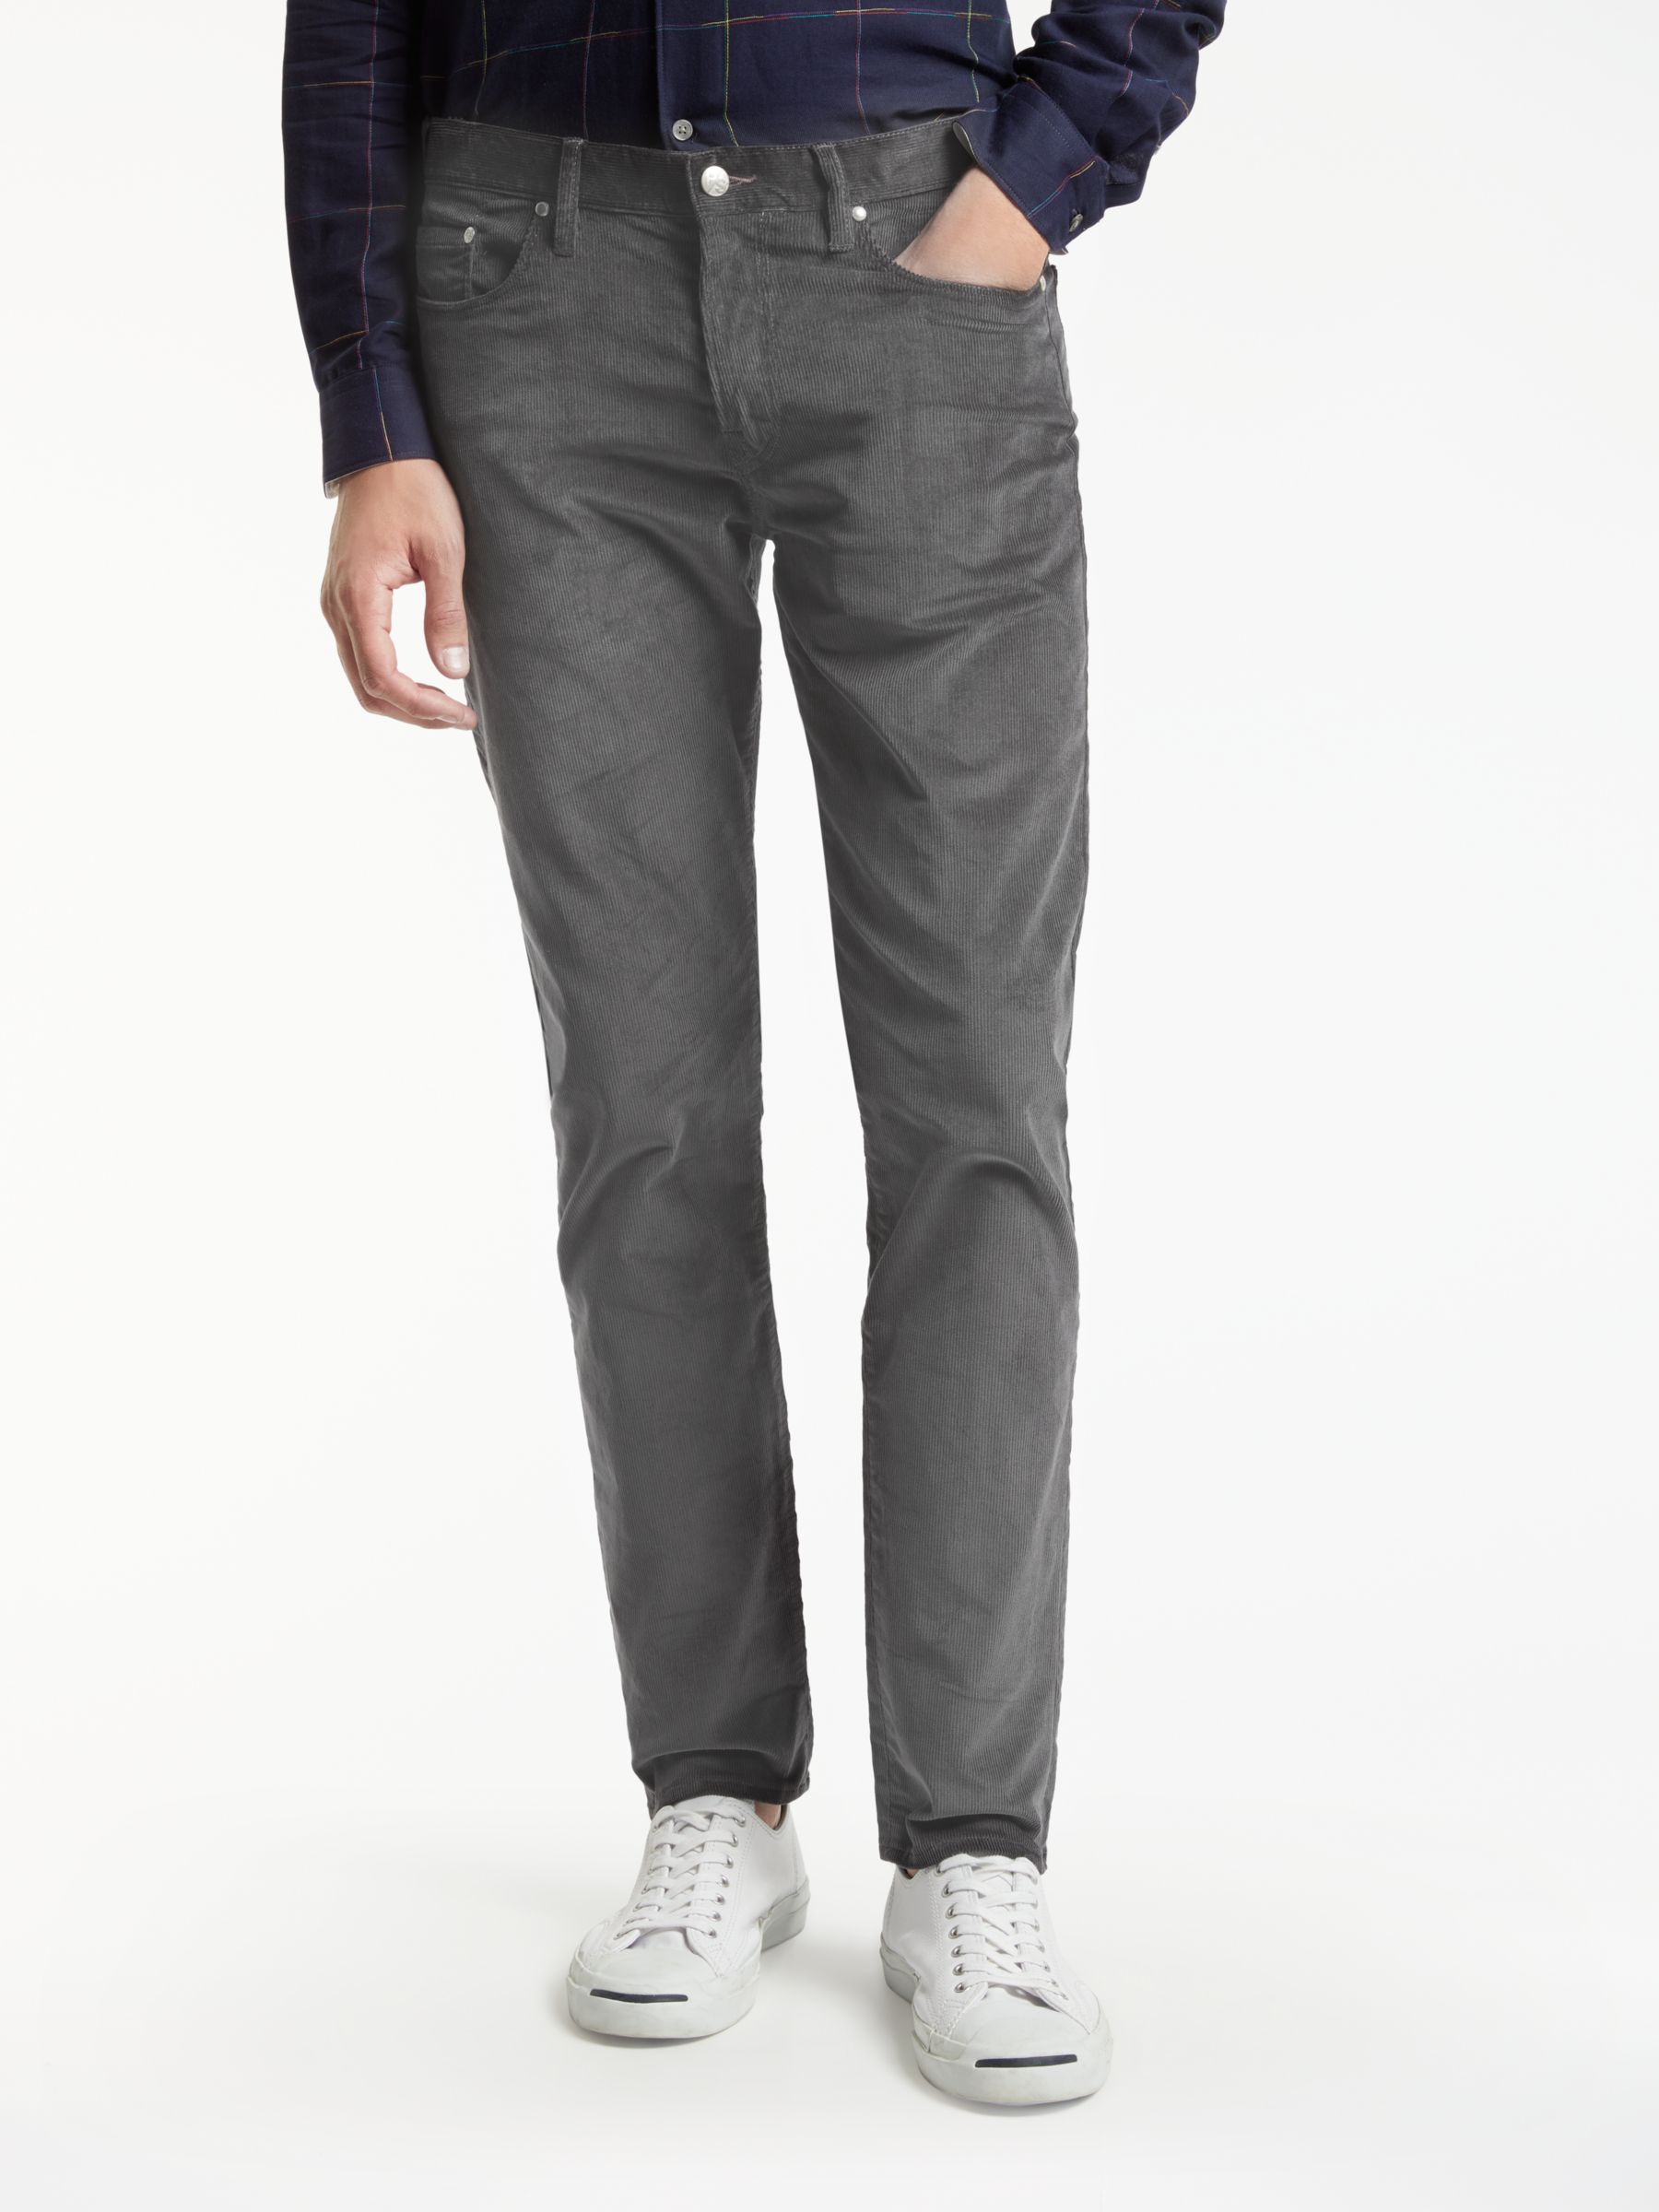 paul smith cords jeans